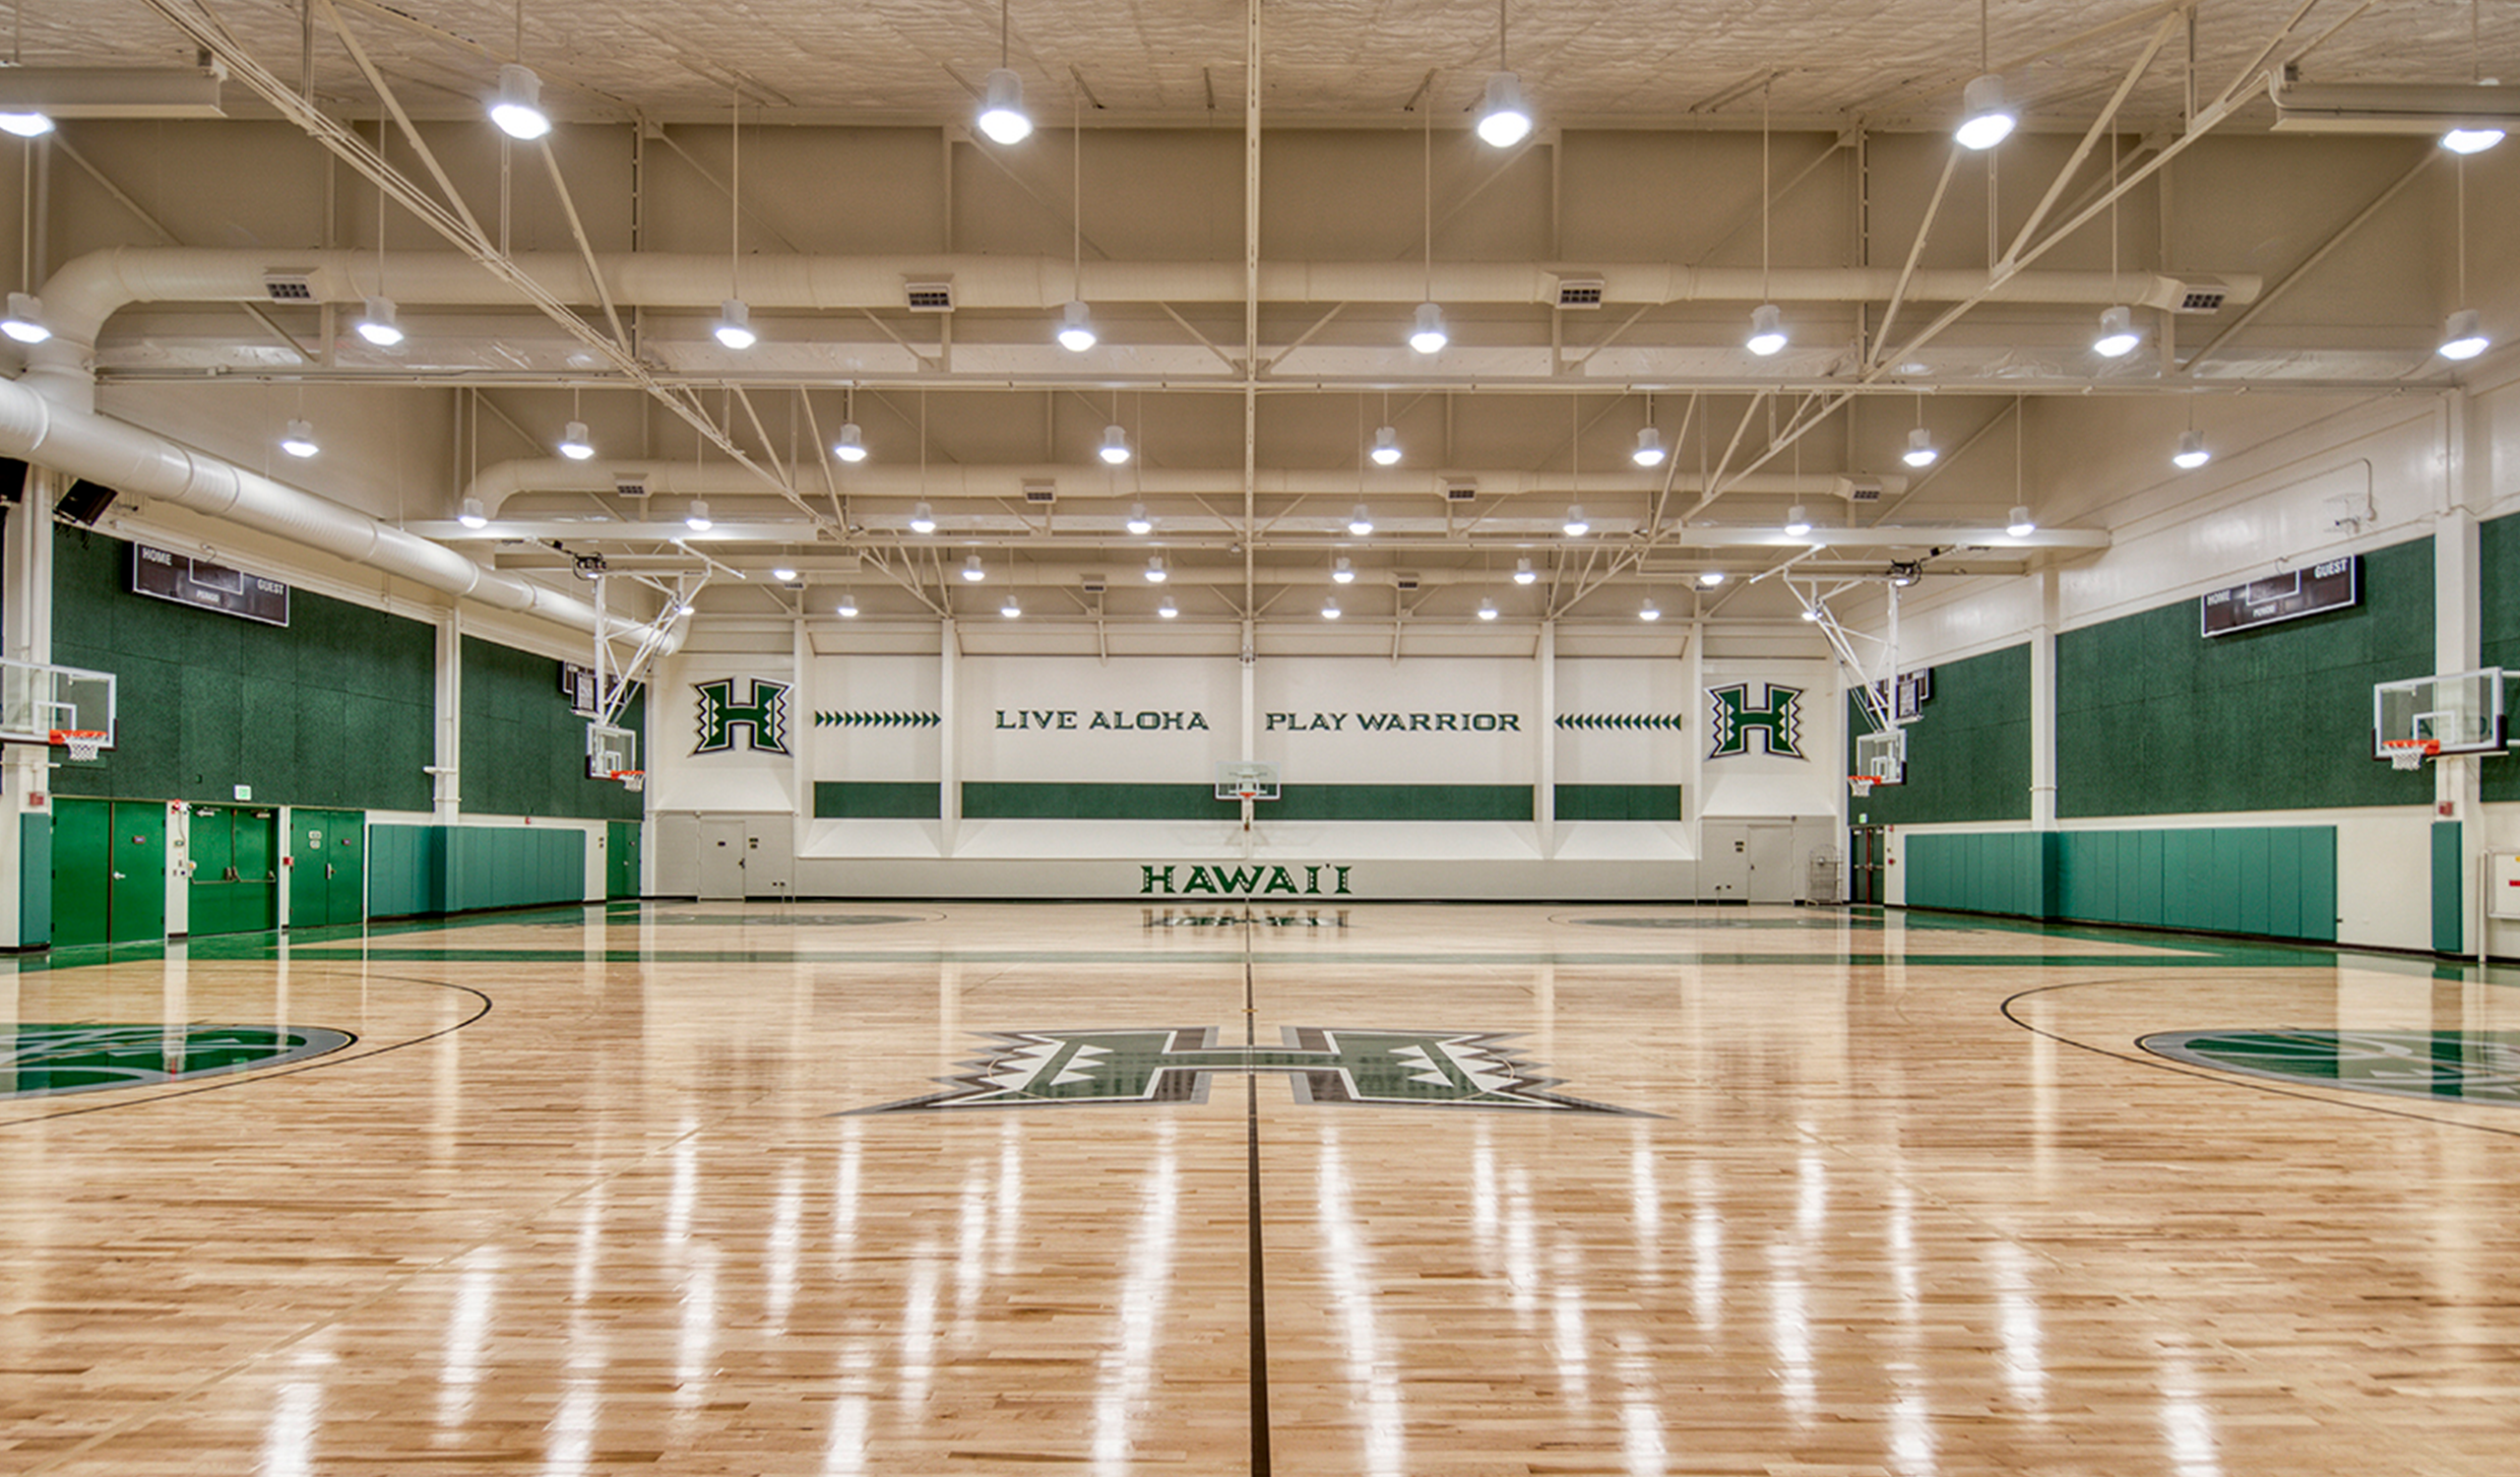 Wide angle view of two basketball courts at the Gymnasiums at University of Hawaii, Manoa